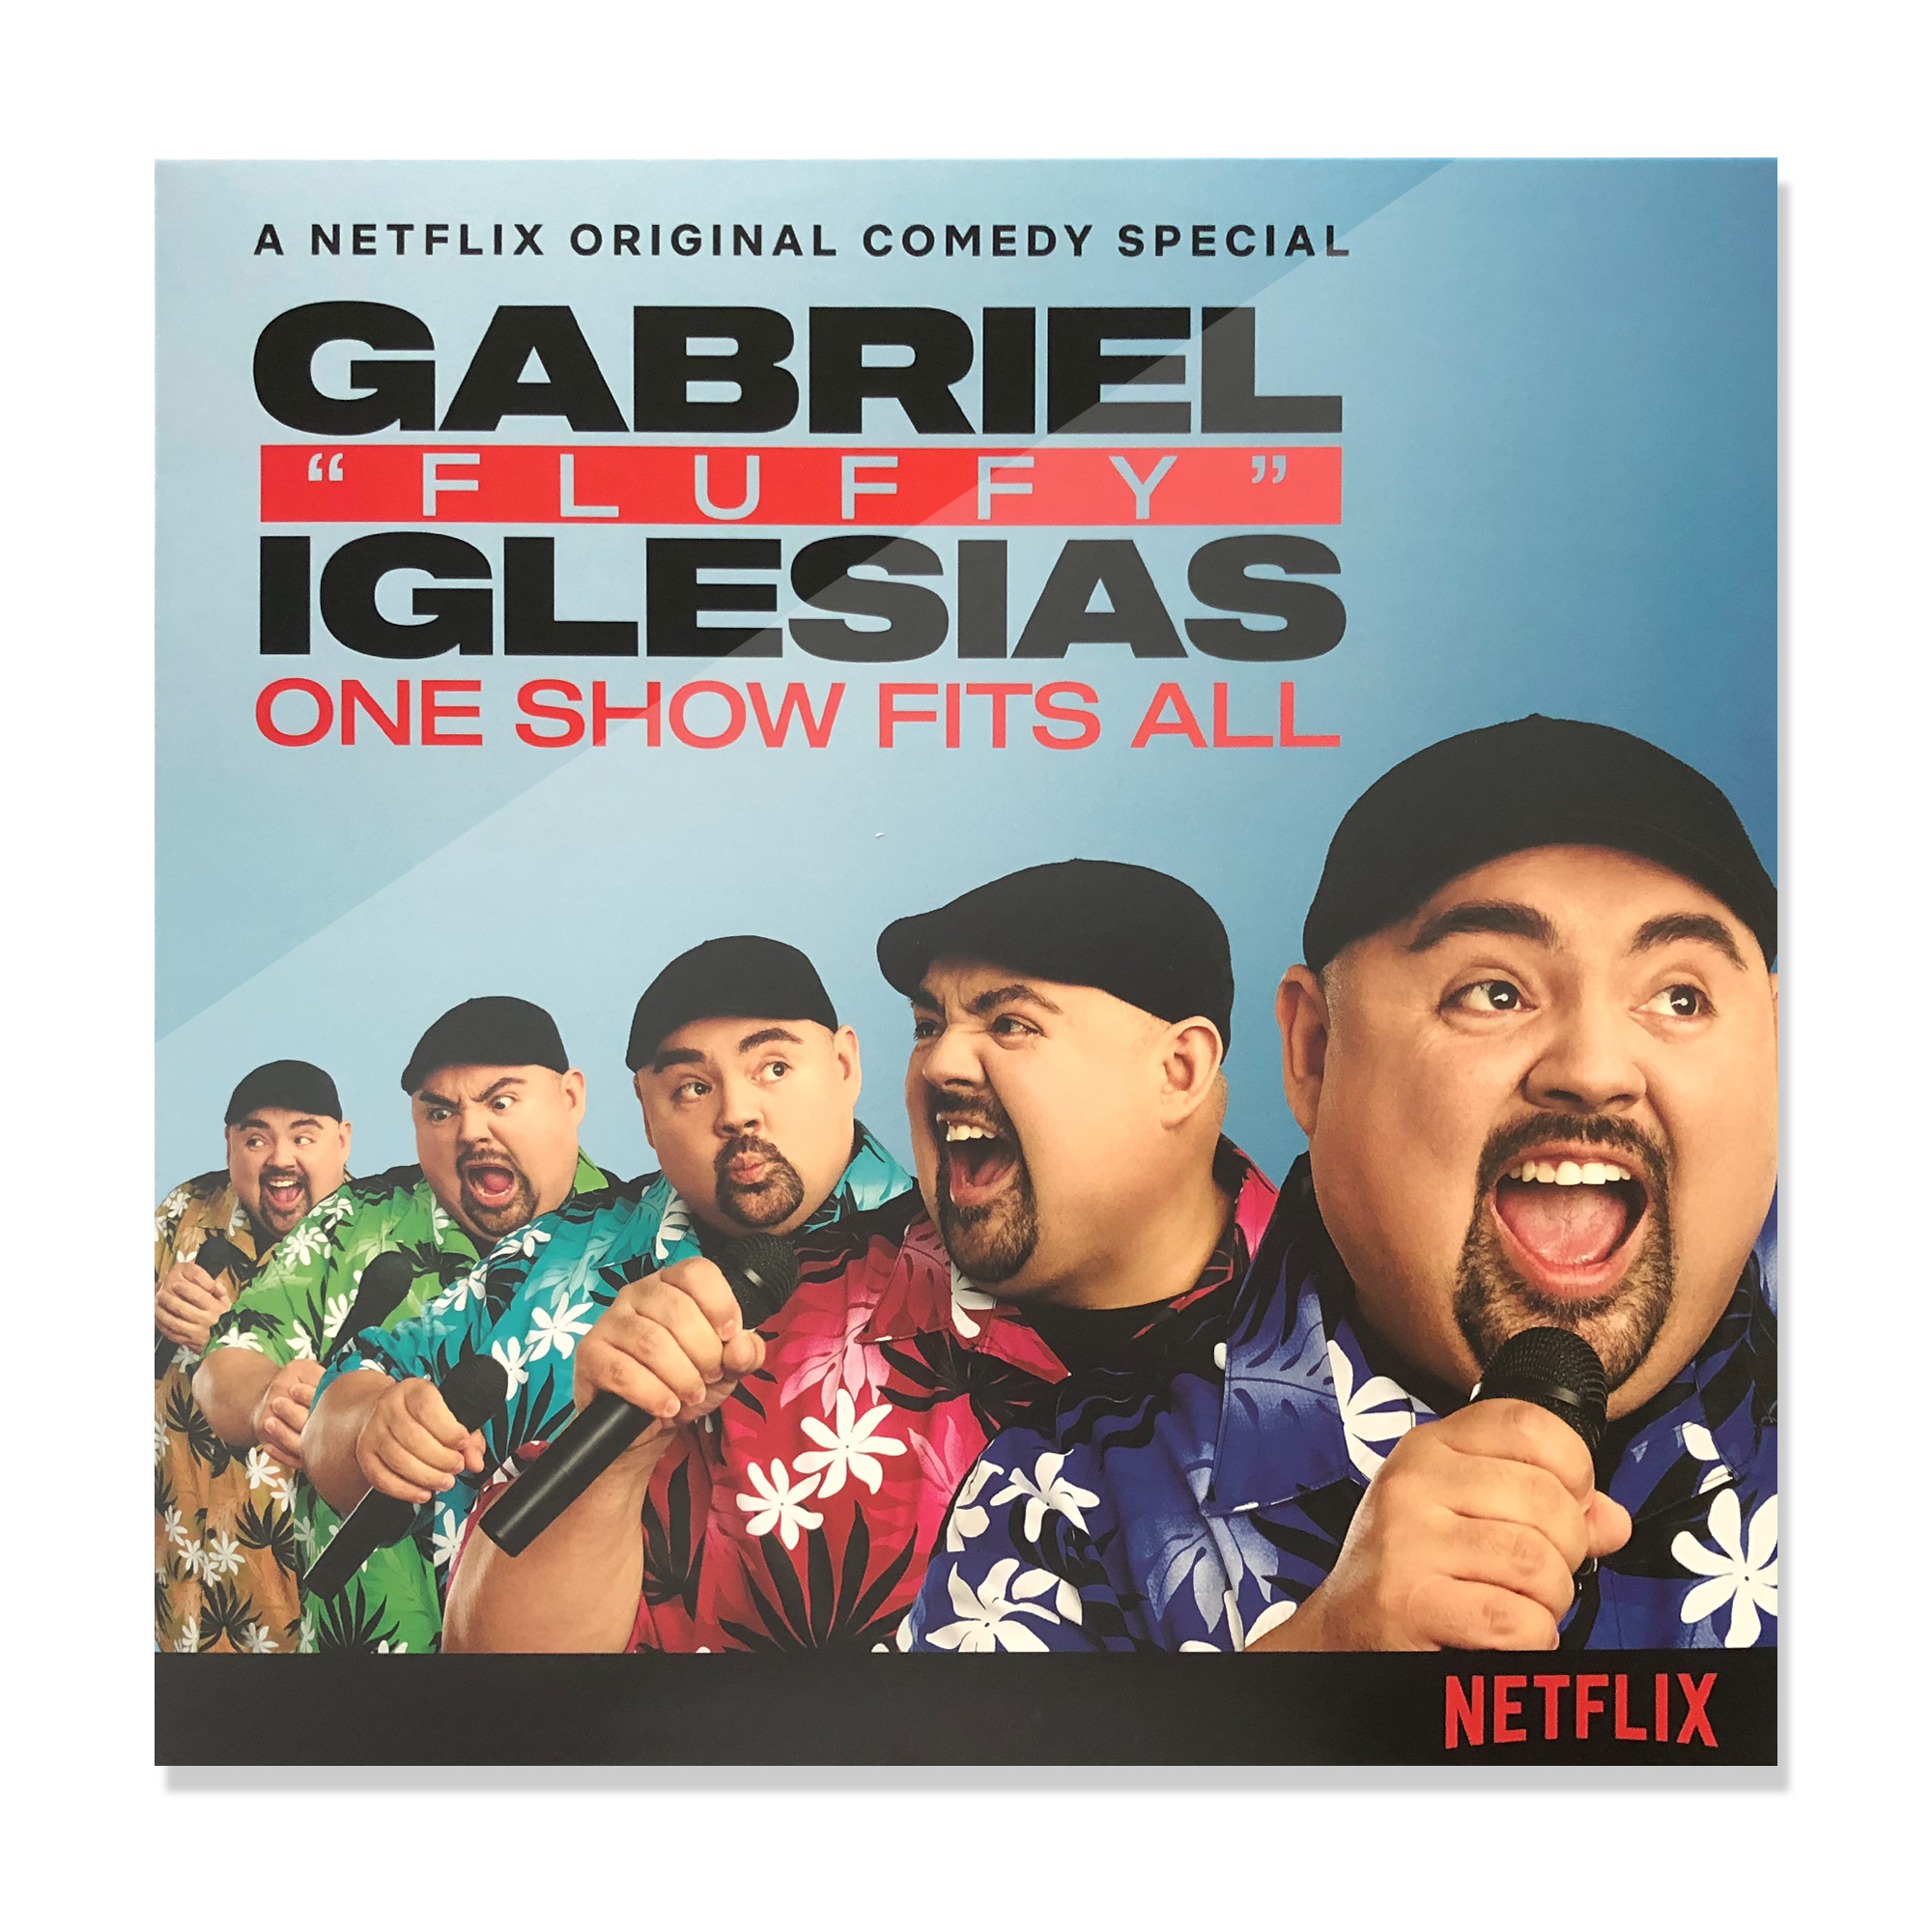 Gabriel iglesias is a very renowned comedian as well as a popular actor fro...